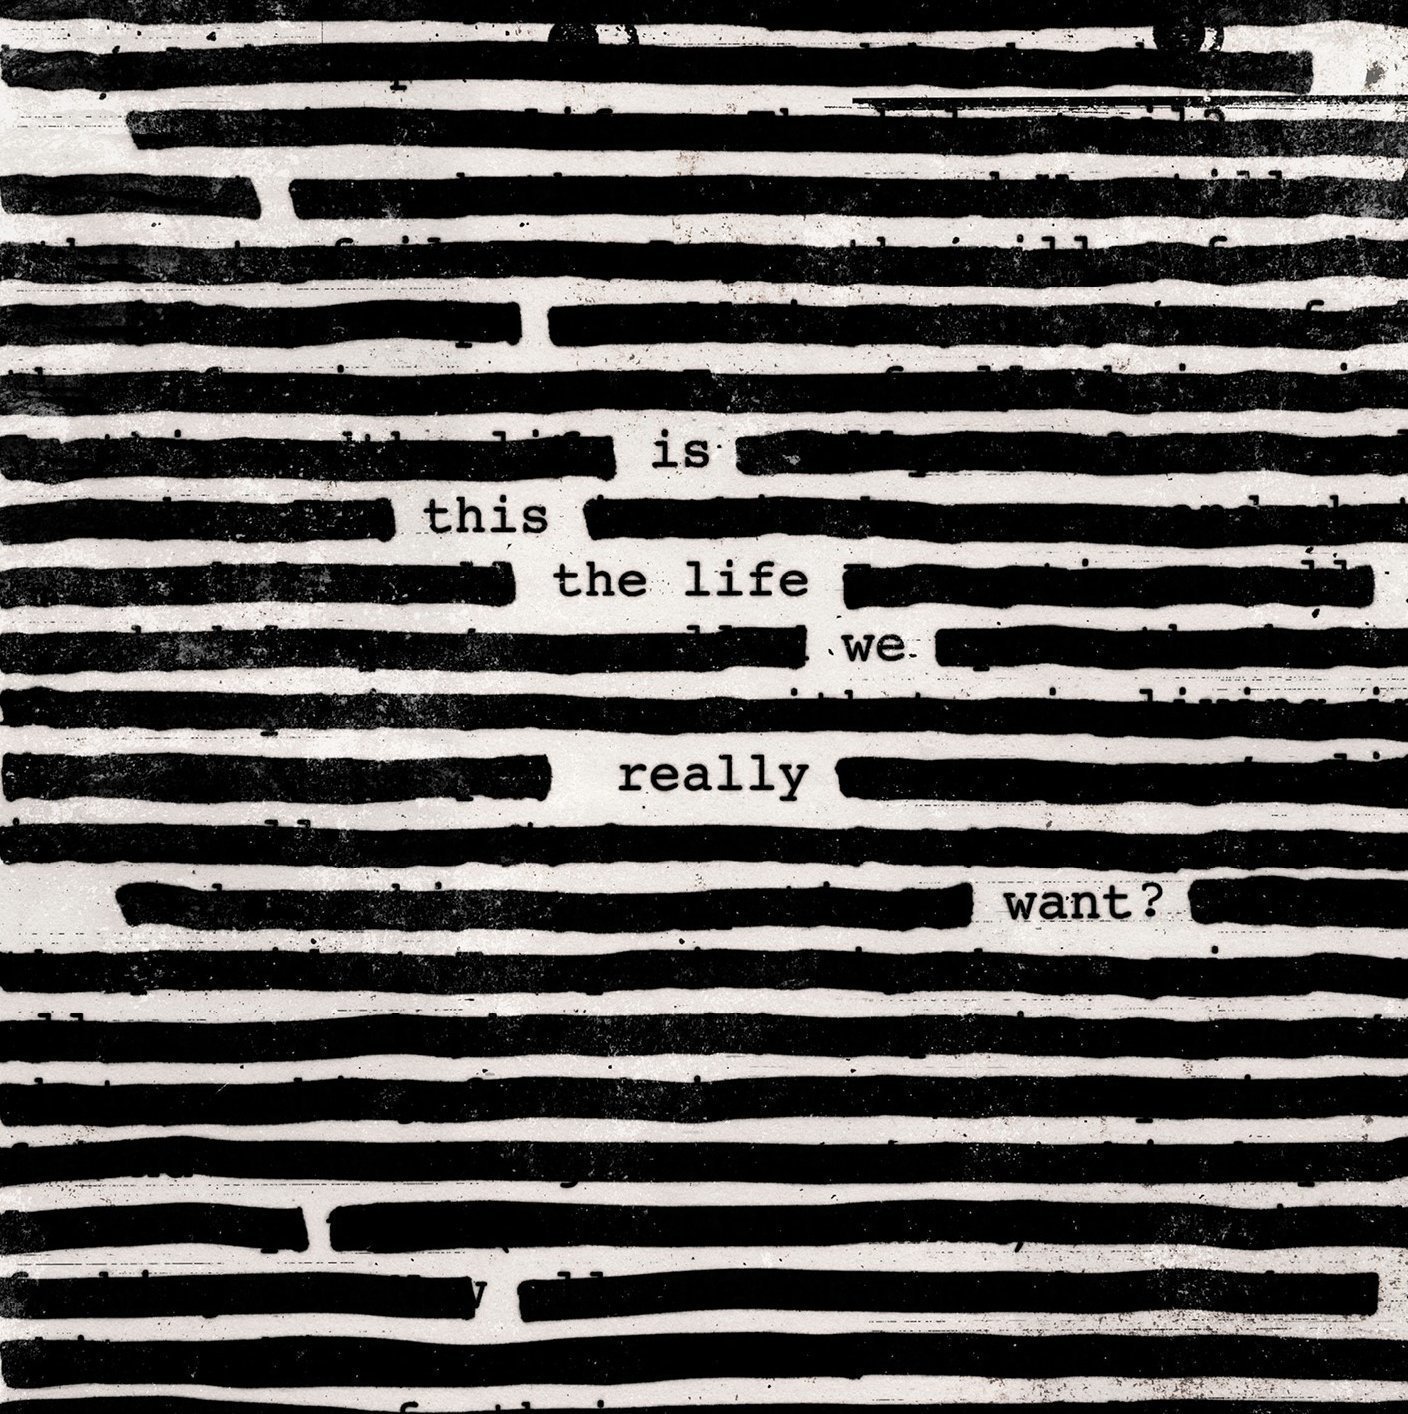 Vinyl Record Roger Waters Is This the Life We Really Want? (2 LP)